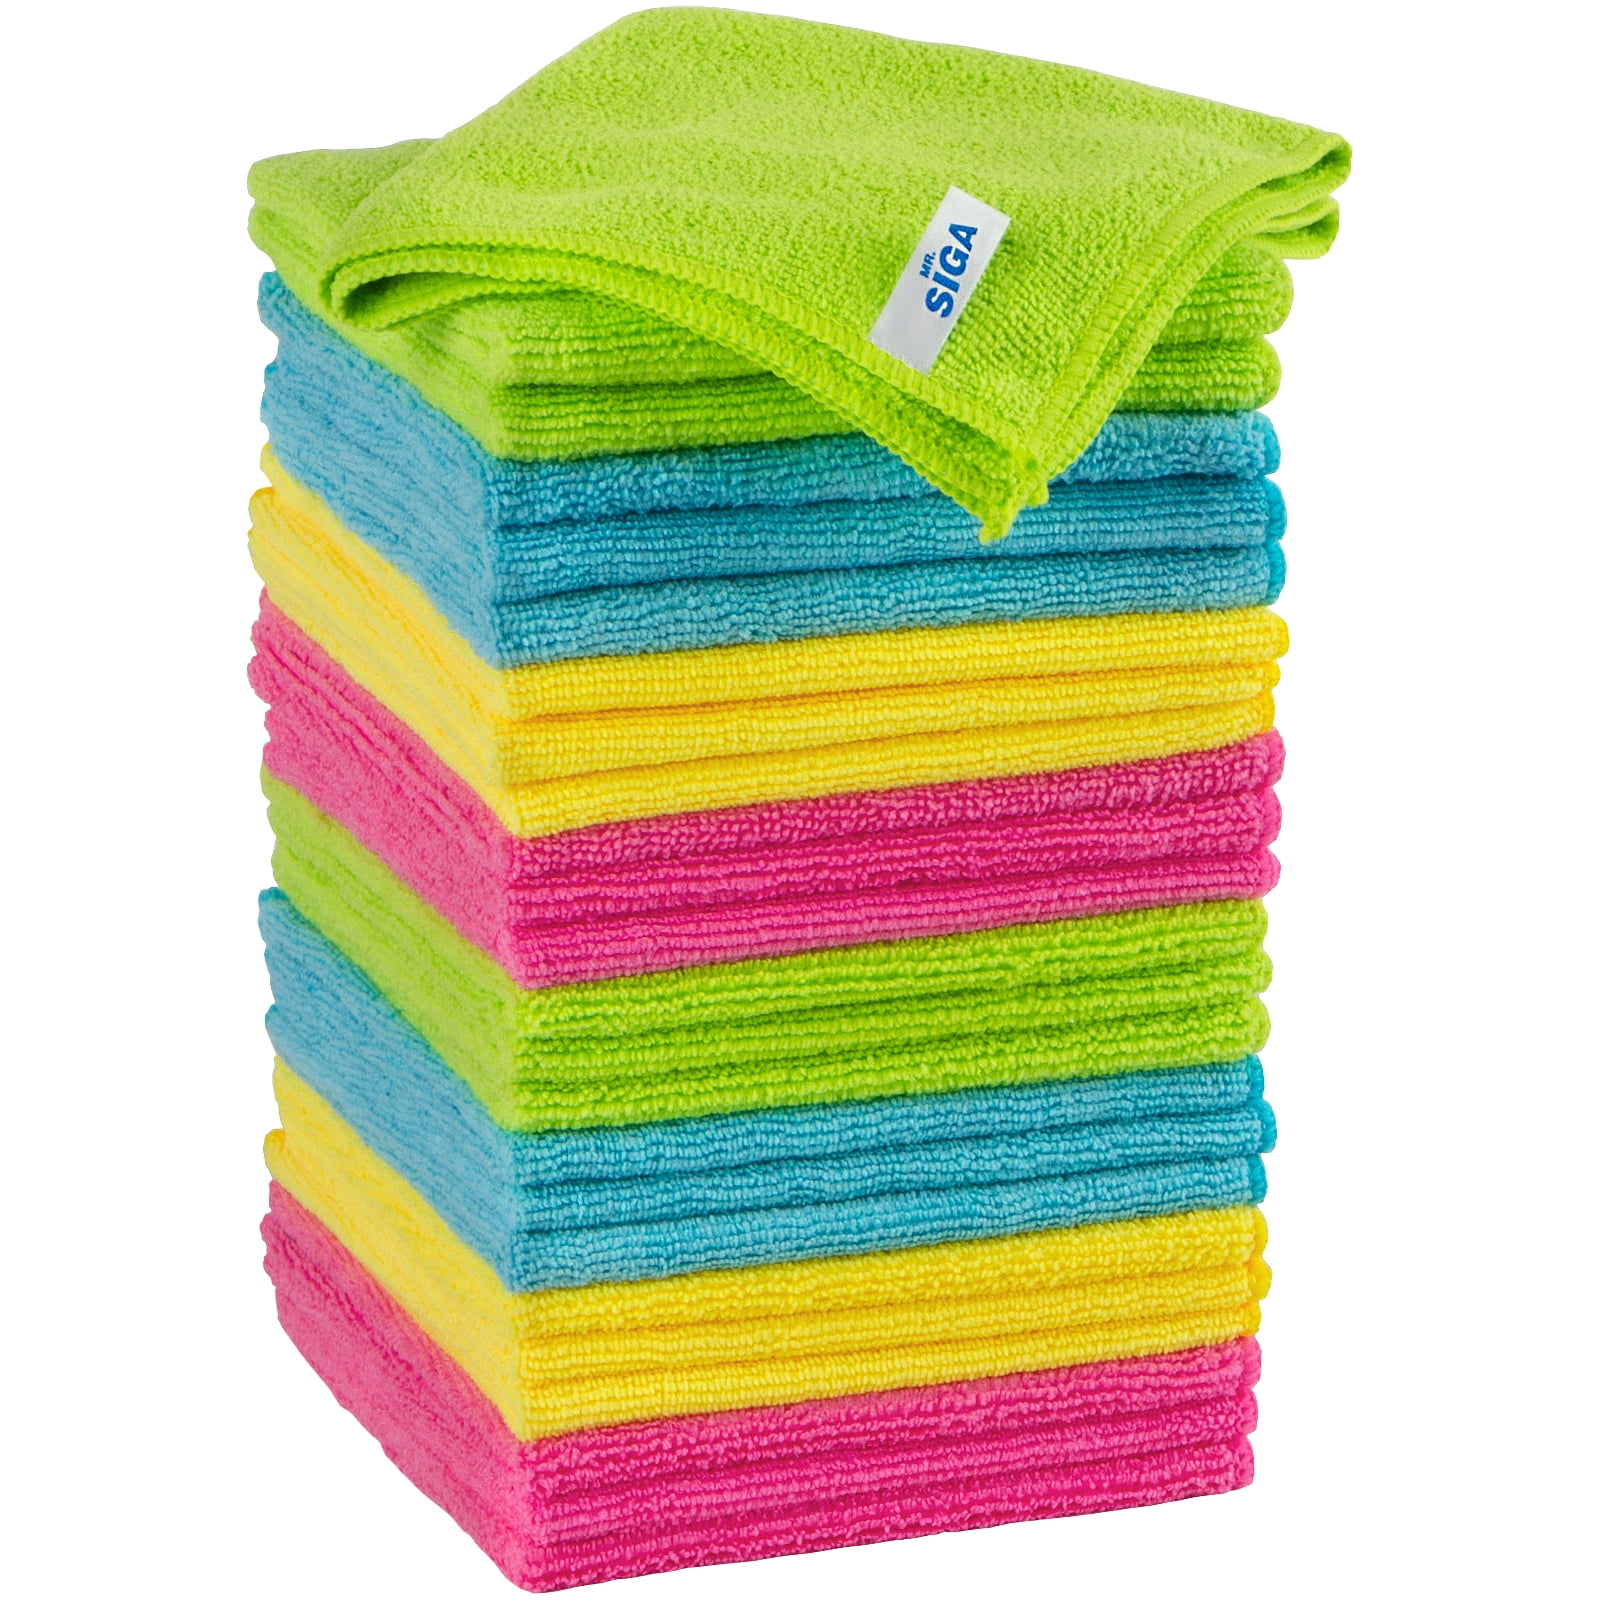 MR Pack of 12 Size: 15.7" x 15.7" SIGA Microfibre Cleaning Cloth 